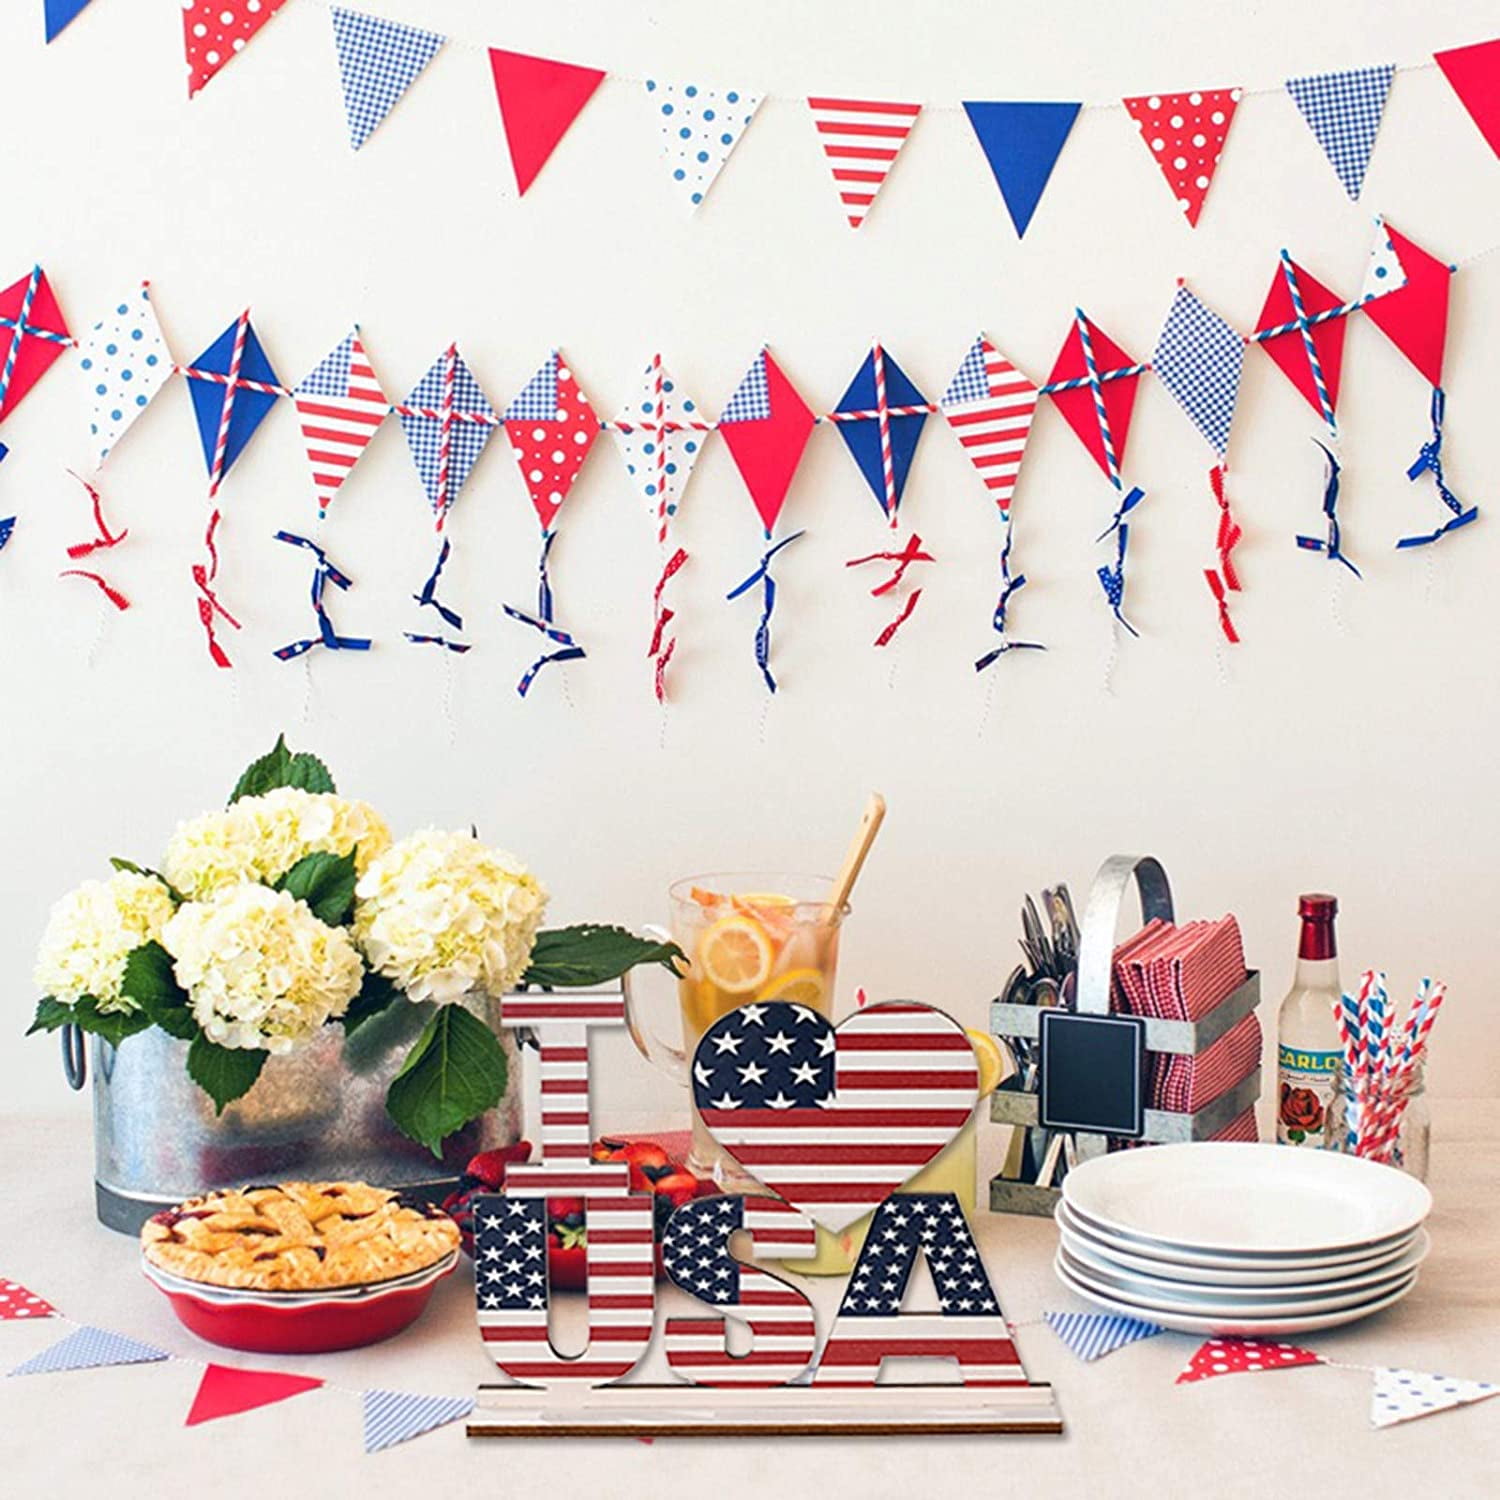 Details about   Wooden Independence Day Home Table Decor Freedom Plaque DIY July Decoration T4K4 